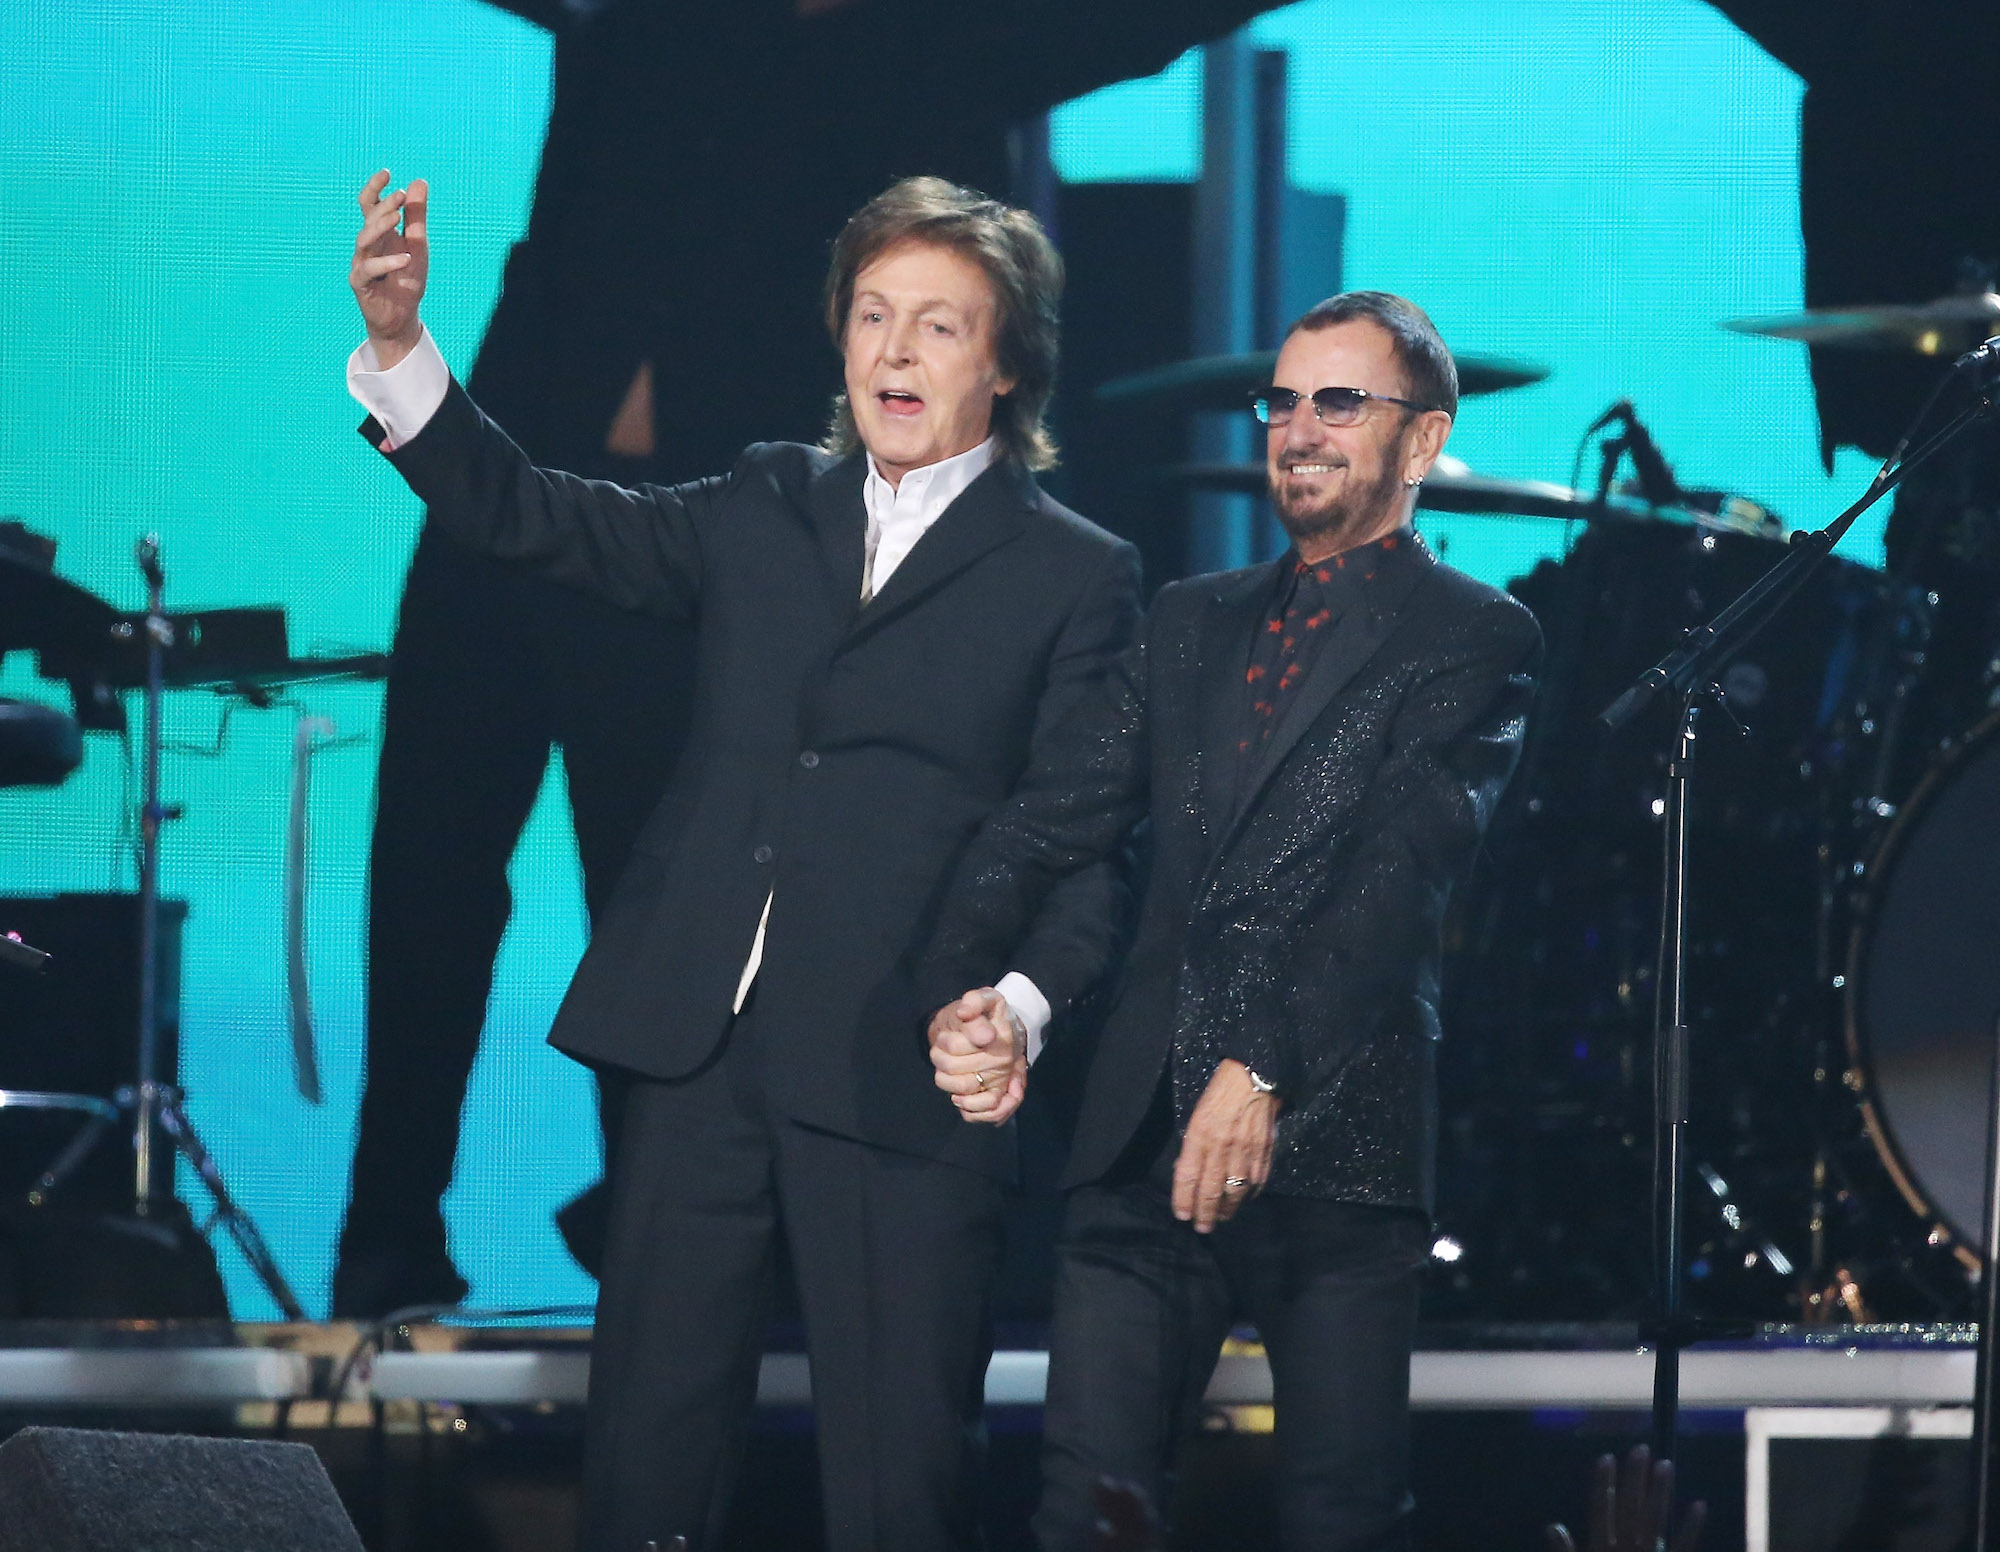 Paul McCartney and Ringo Starr formerly of The Beatles perform during the 56th Grammy Awards in Los Angeles